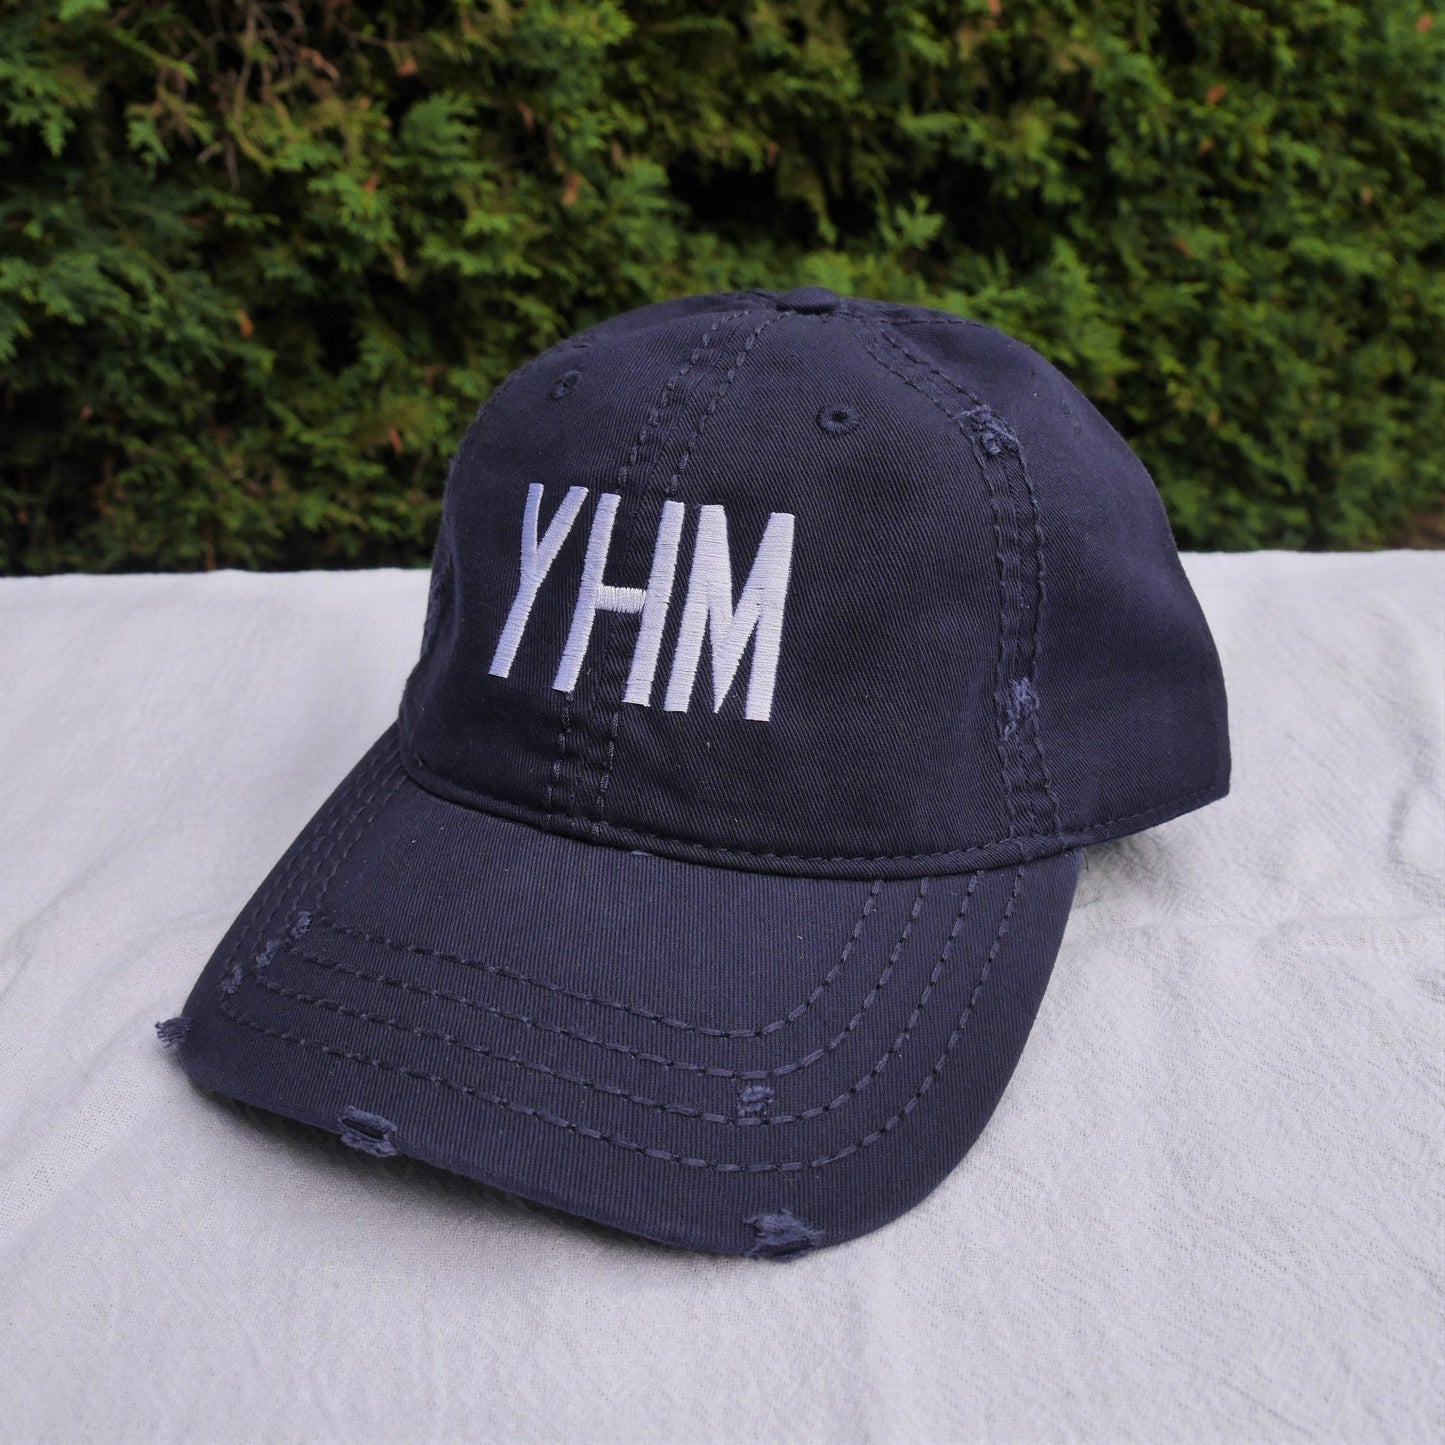 Airport Code Distressed Hat - White • OGG Maui • YHM Designs - Image 21